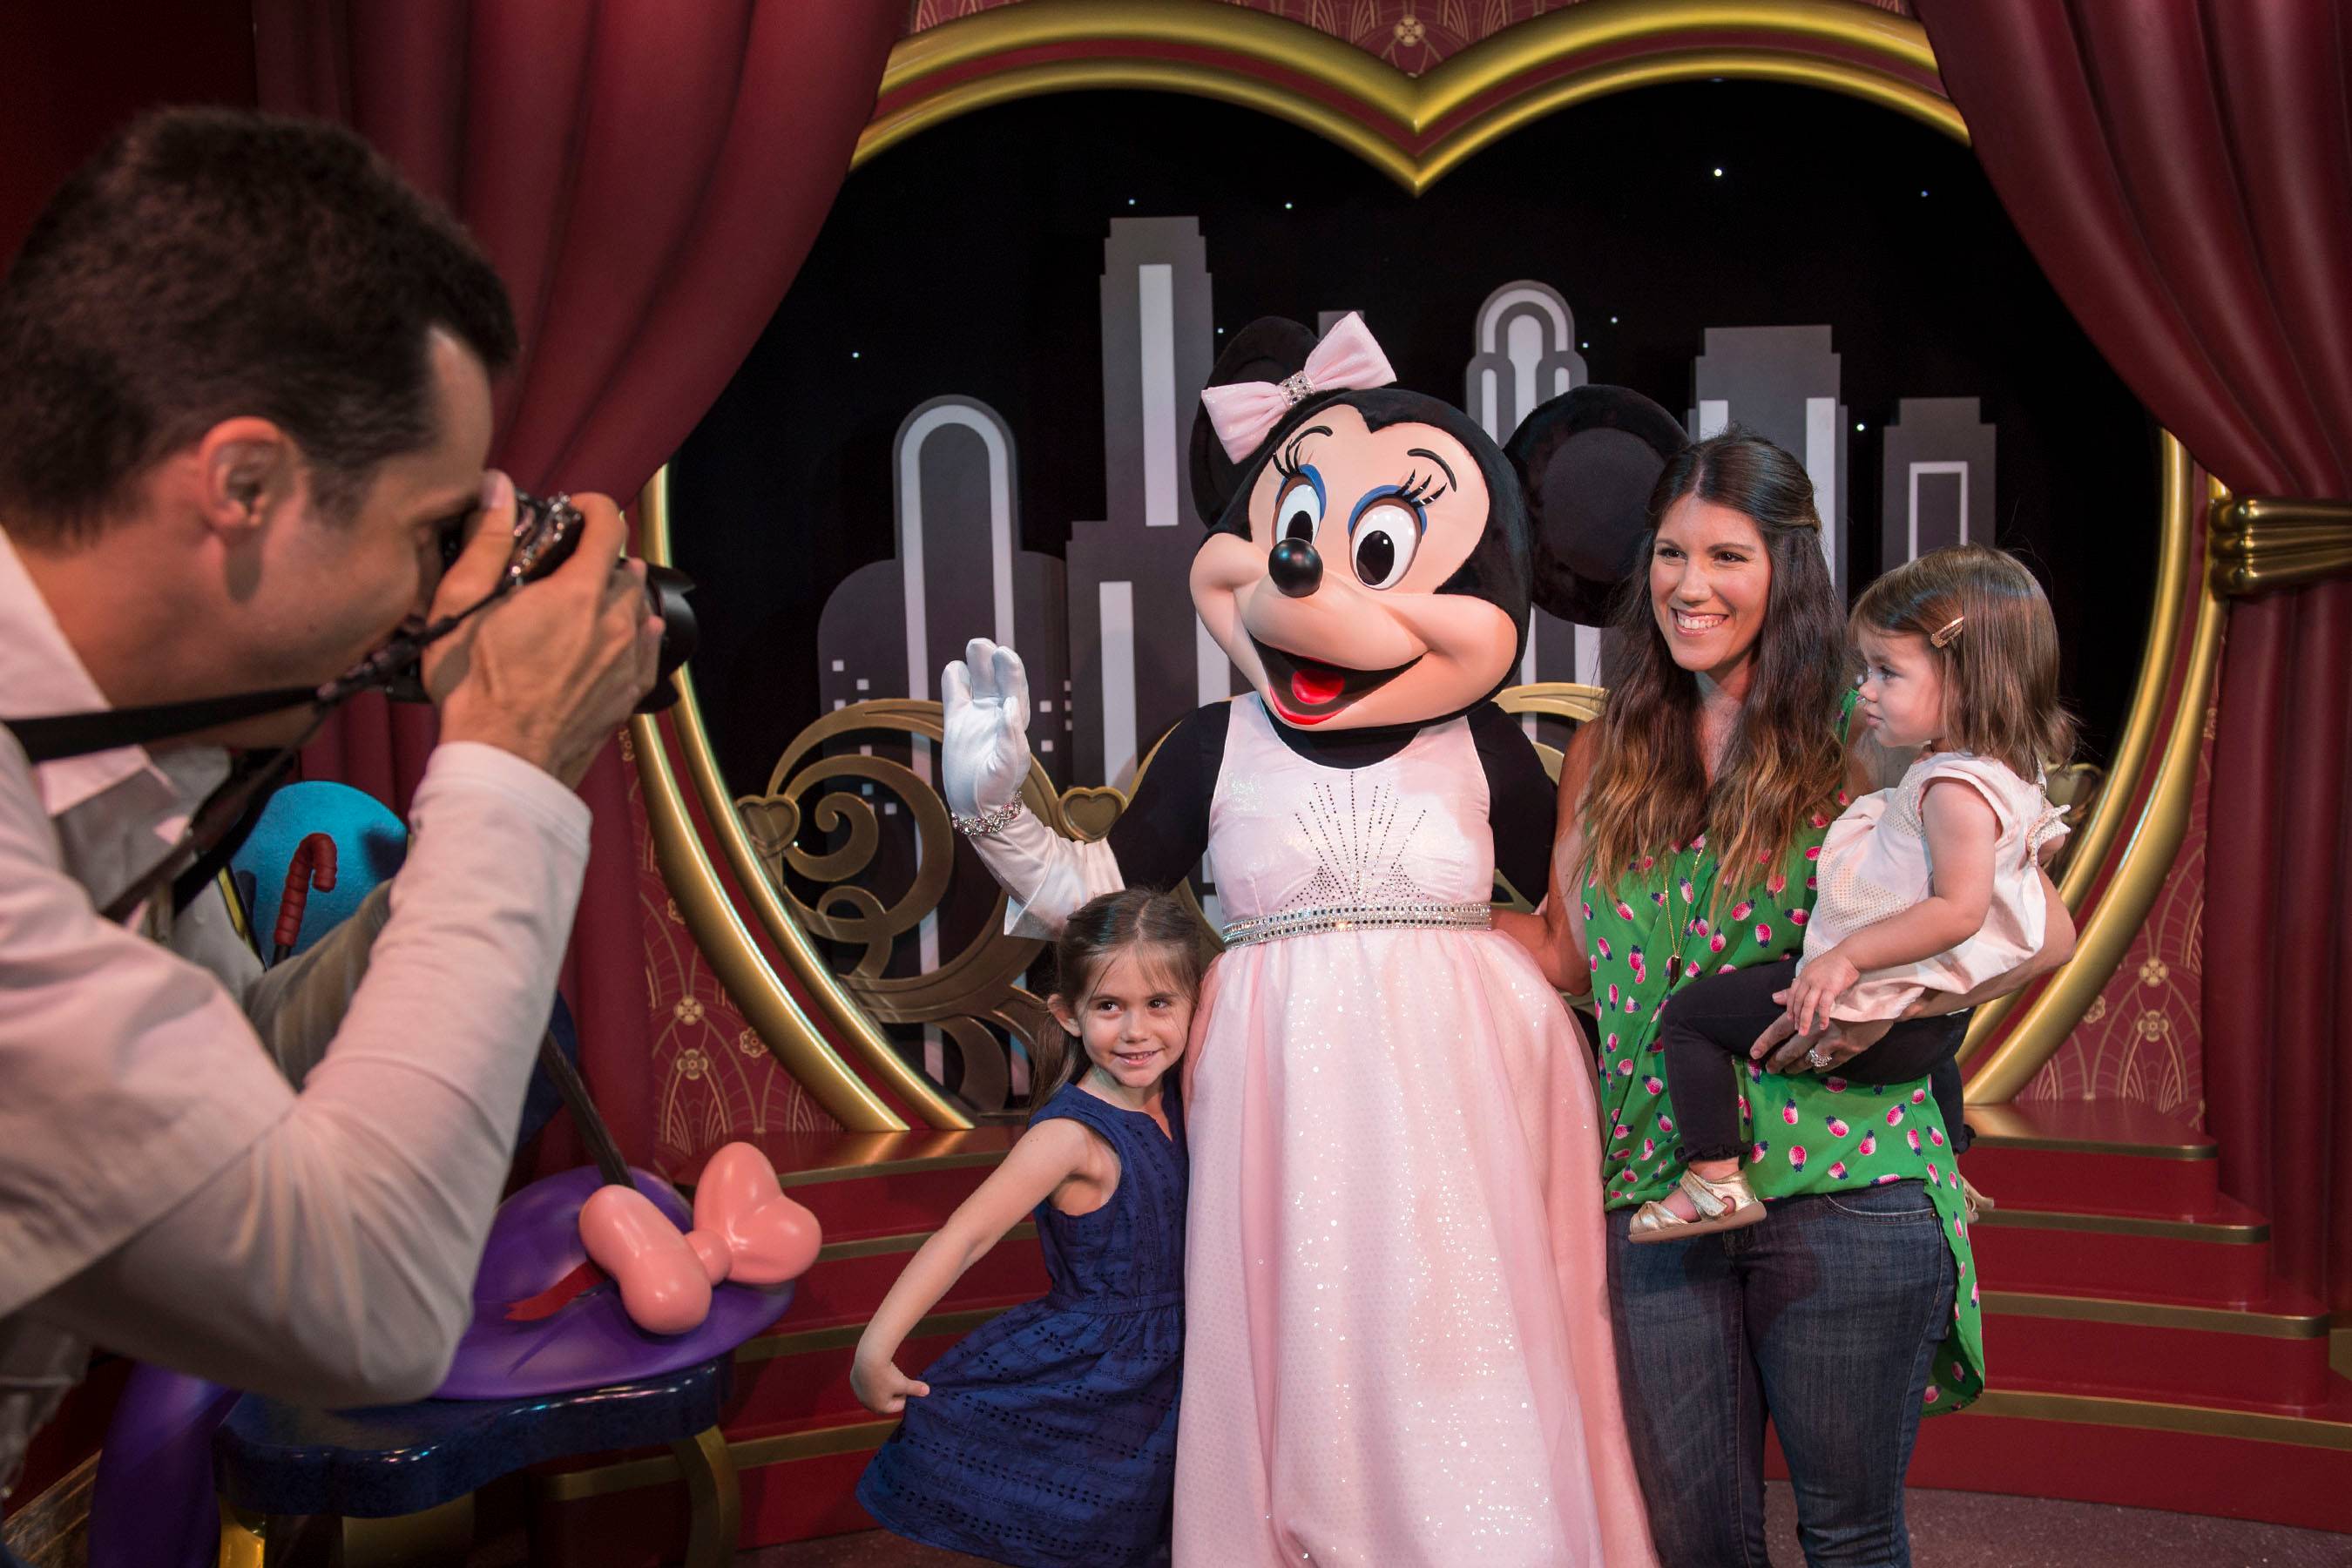 PHOTOS - 'Mickey and Minnie Starring in Red Carpet Dreams' opens later this week